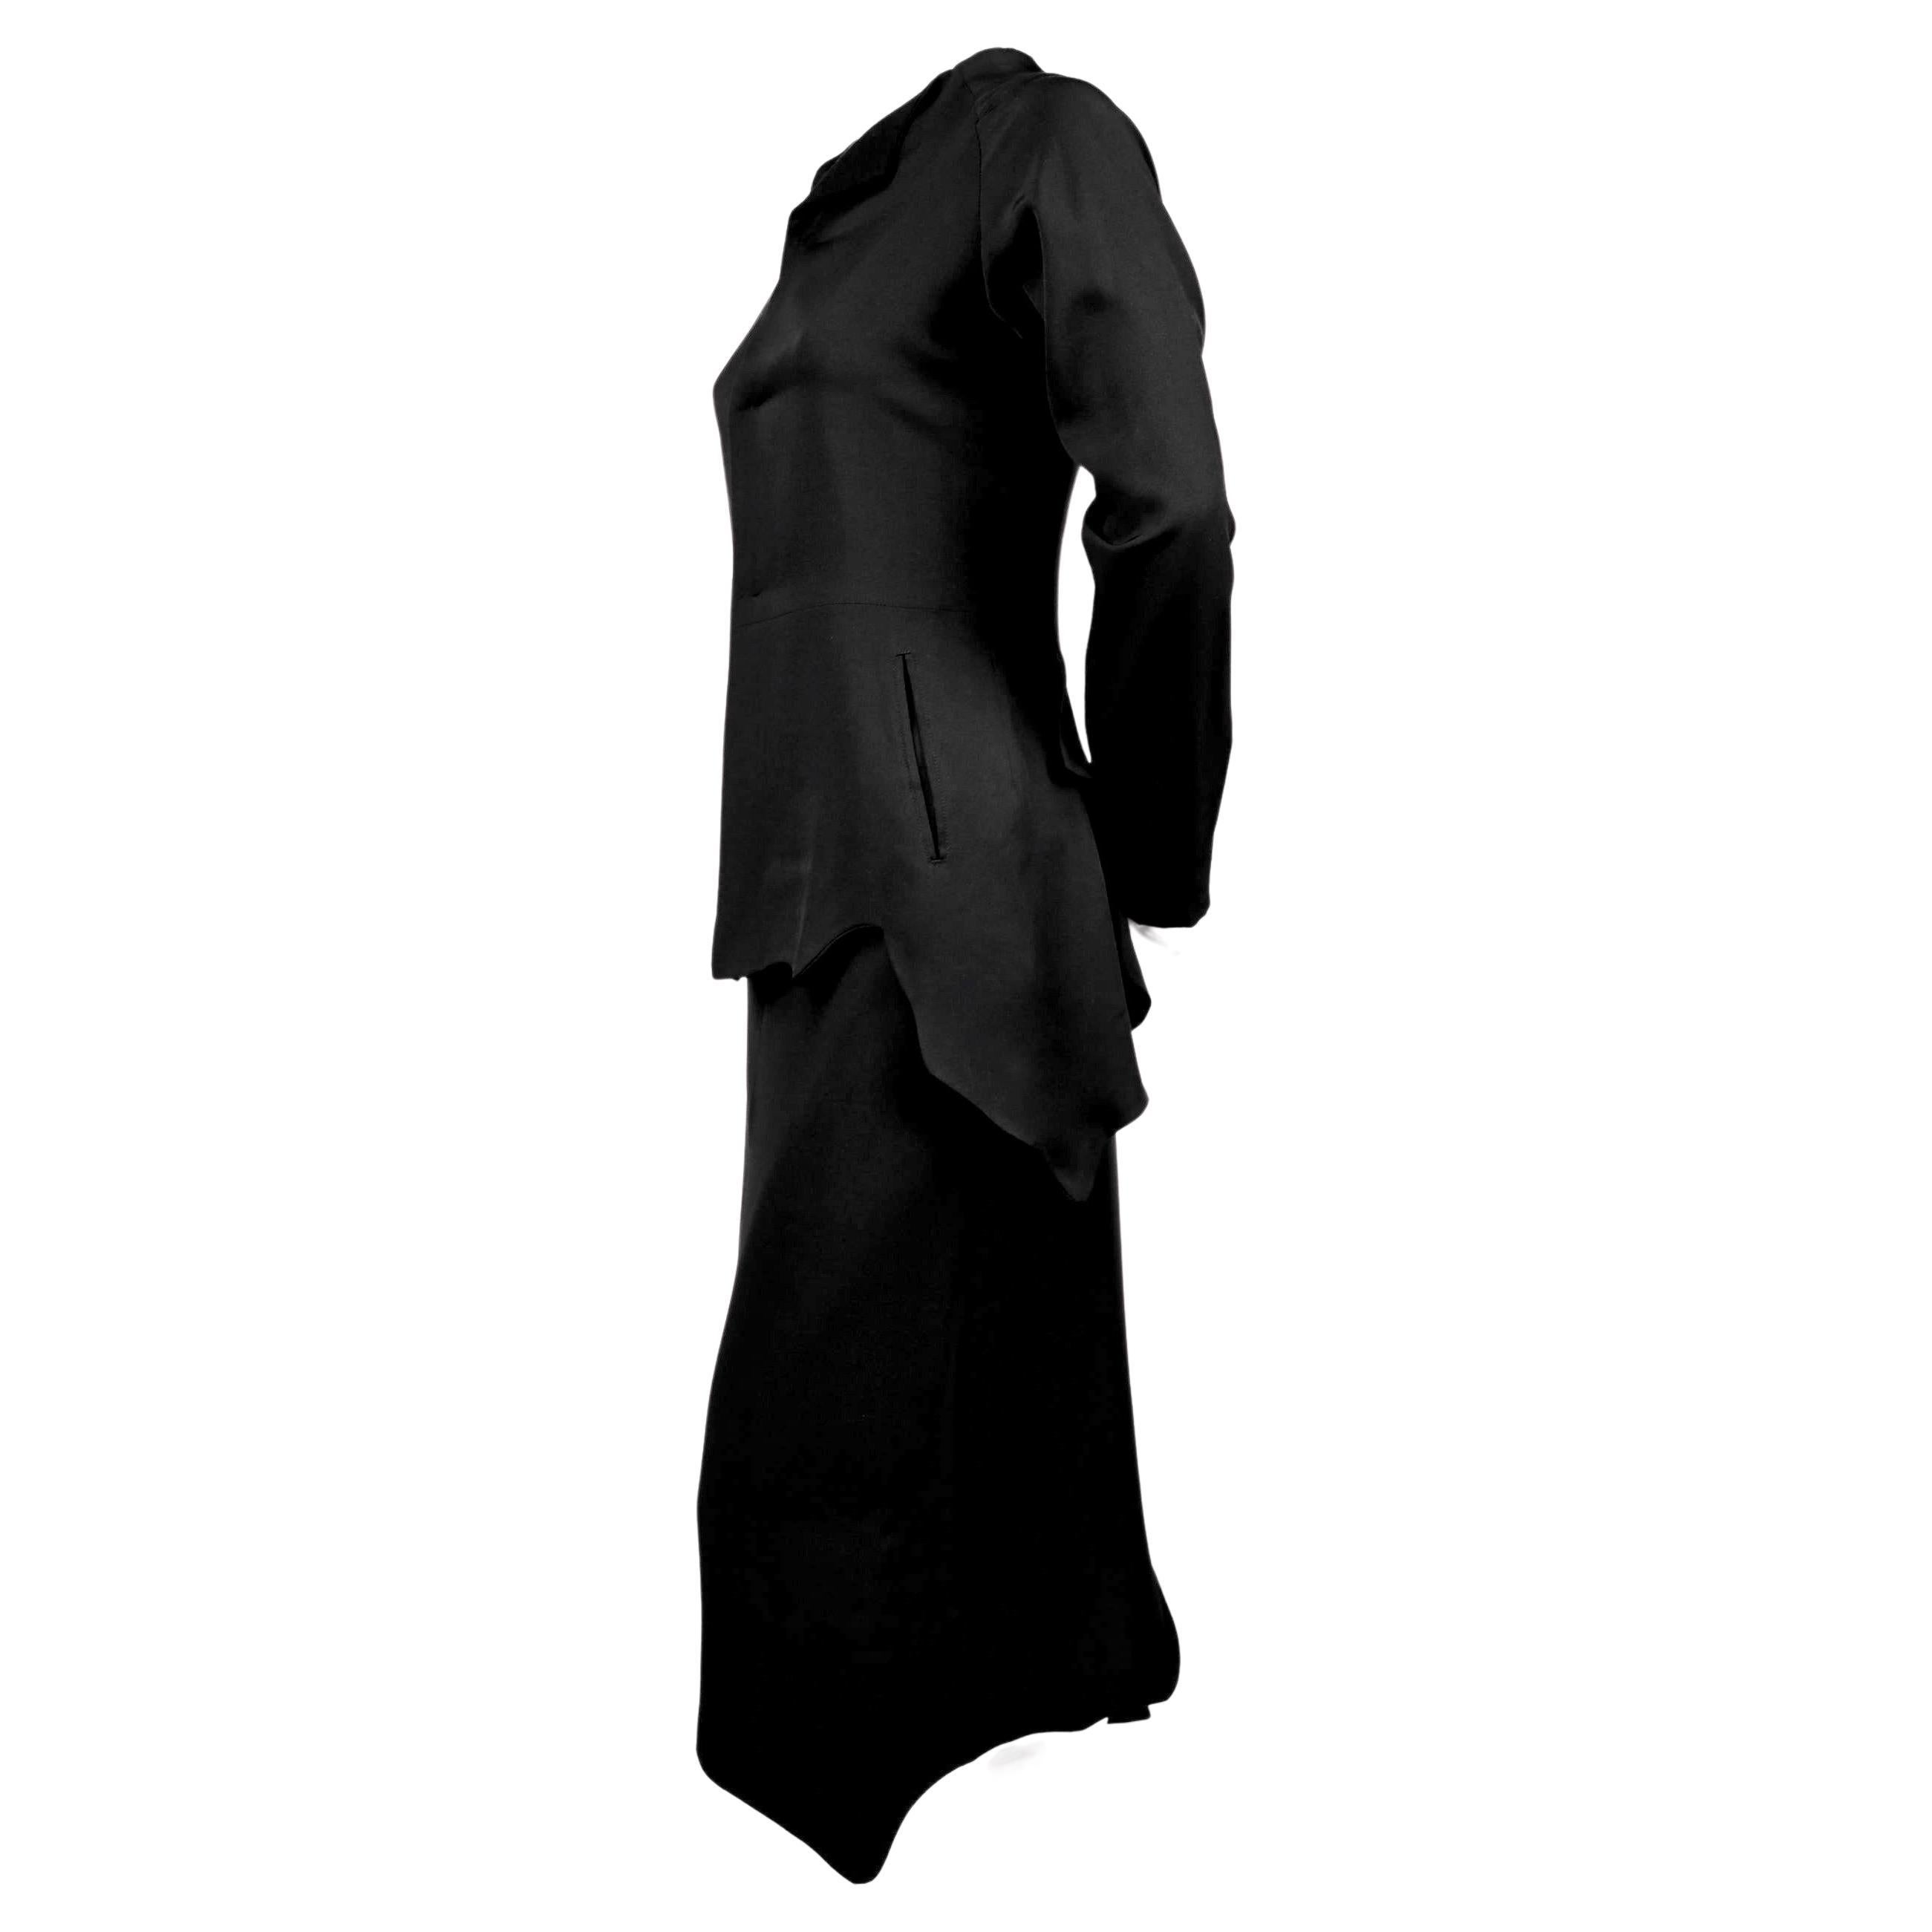 Jet-black, asymmetrical, silk jacket and skirt from Yohji Yamamoto exactly as seen on the runway for fall of 2000. Size '1'. Fits a US 2. Approximate measurements: Jacket: bust 32